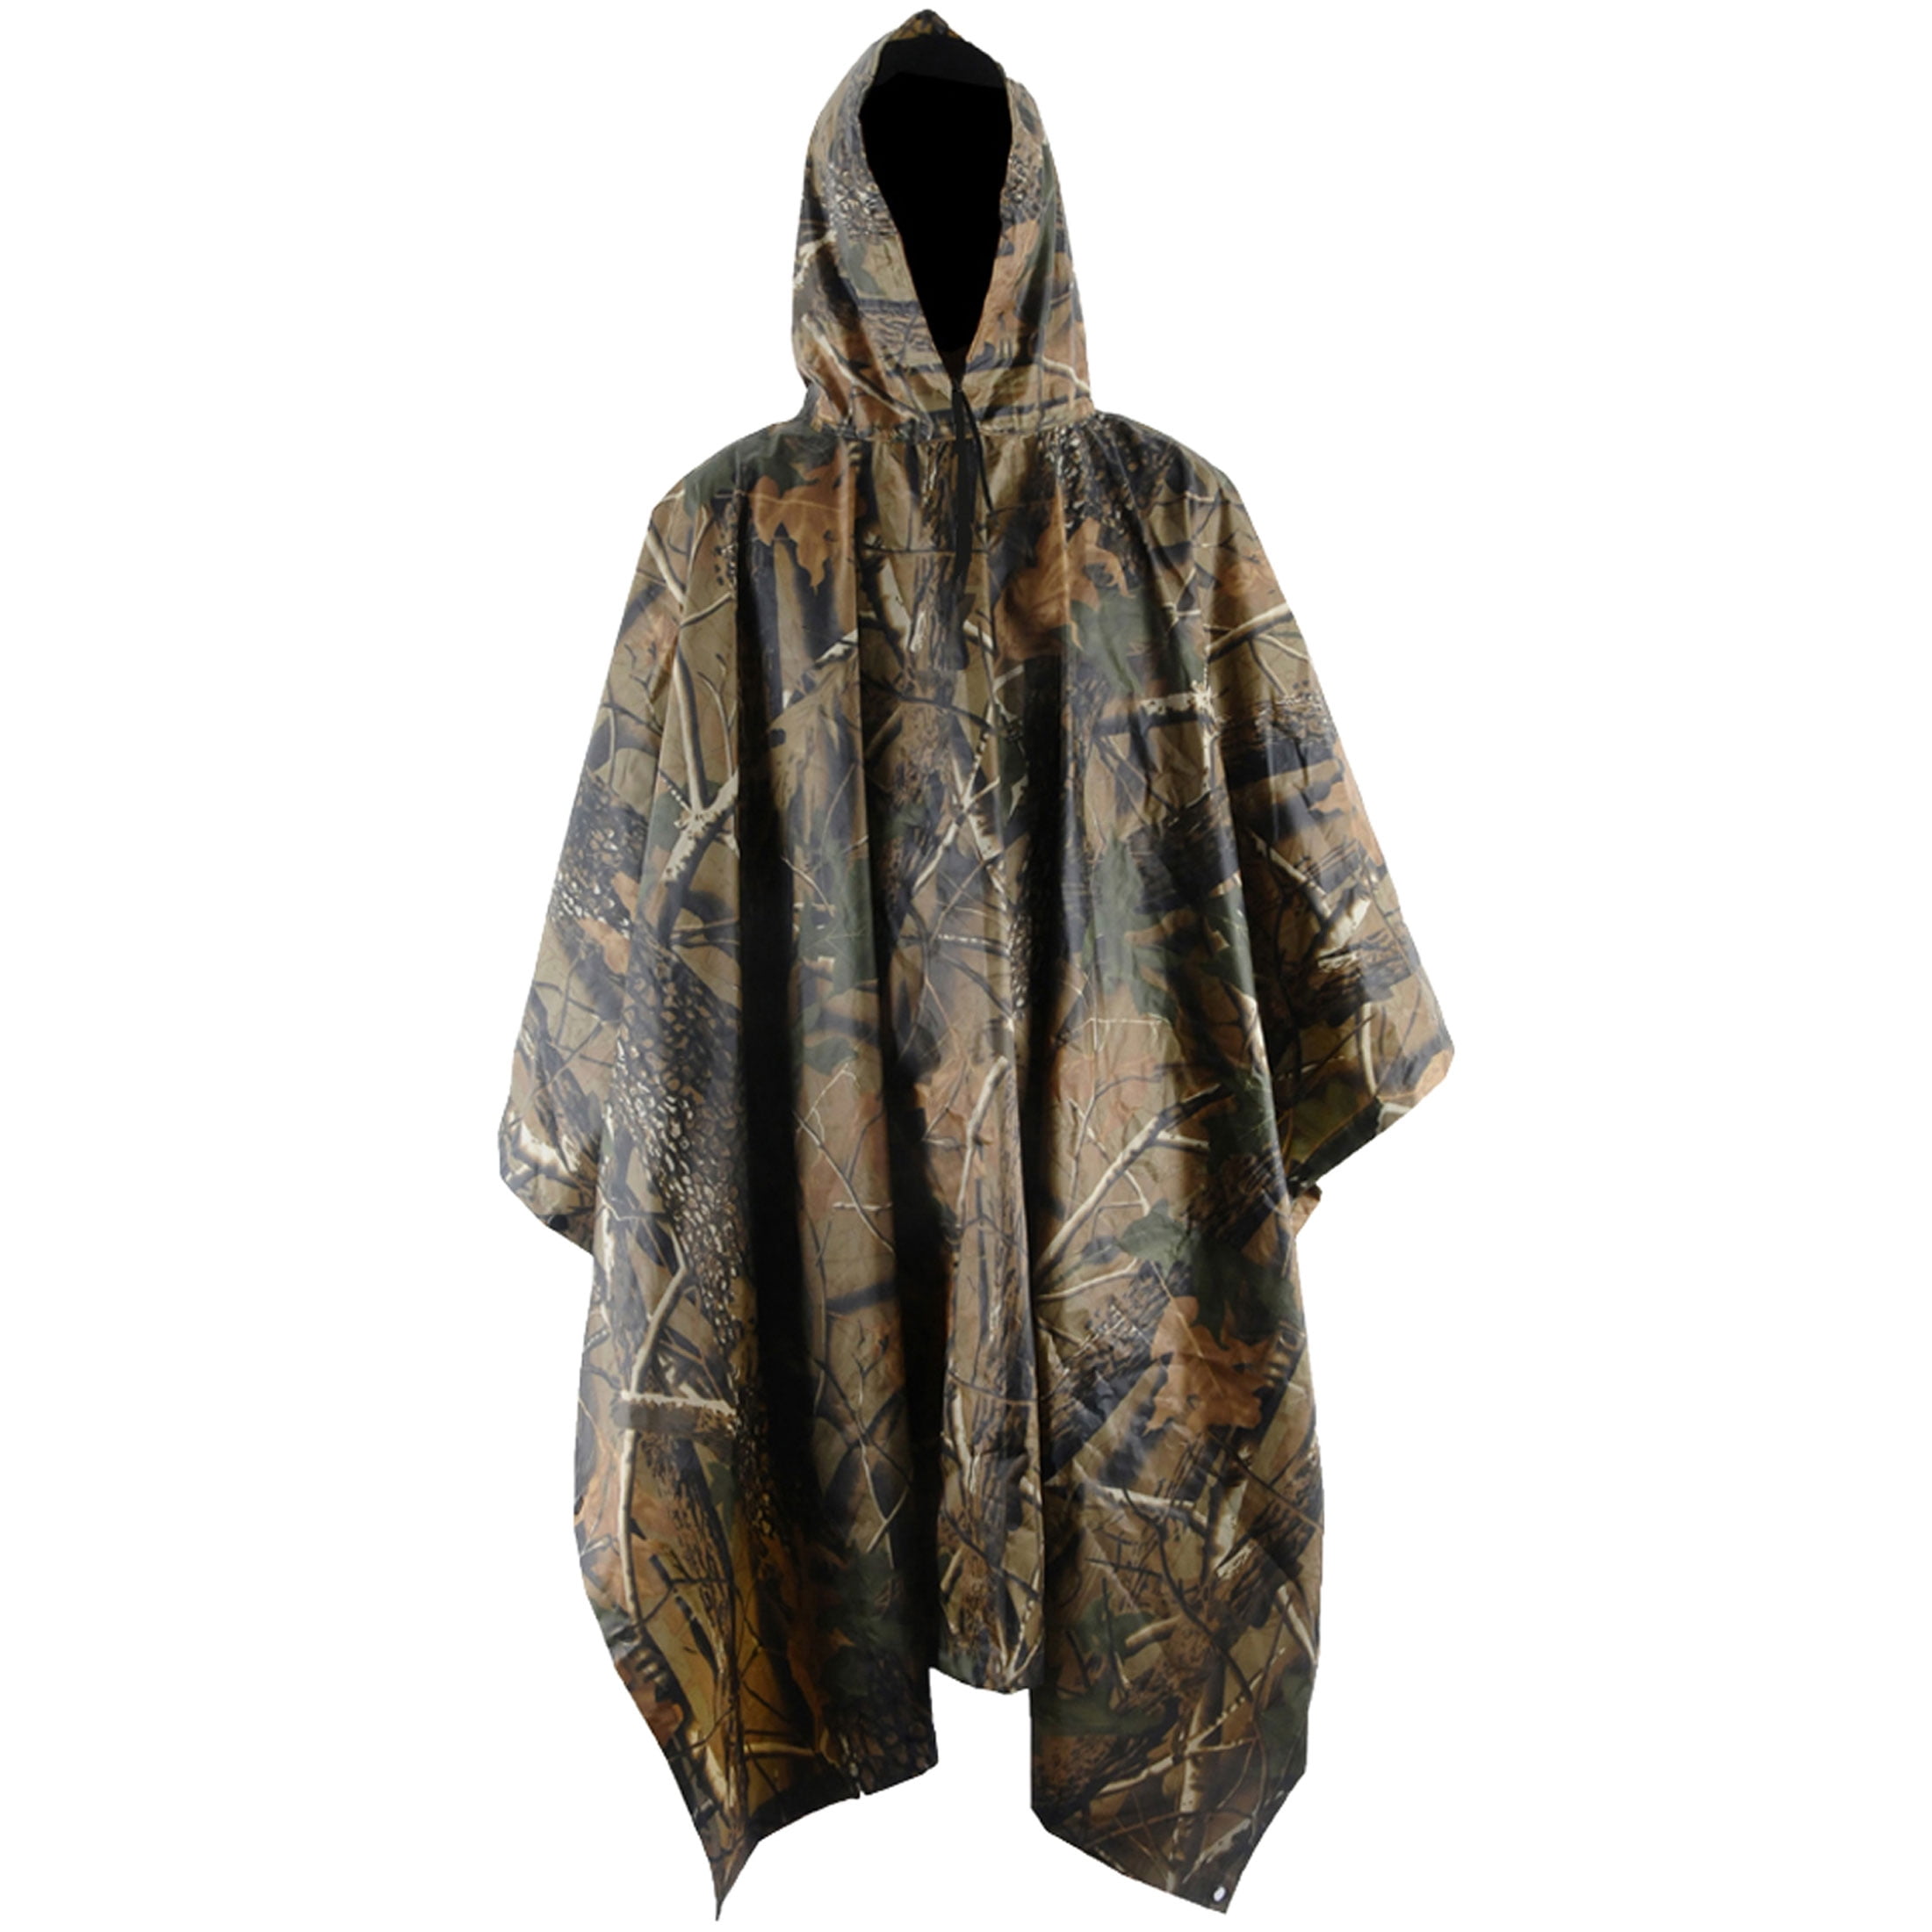 Wetlands Camo 100% Waterproof Packable Wildfowling Shooting Cape Shelter Poncho 